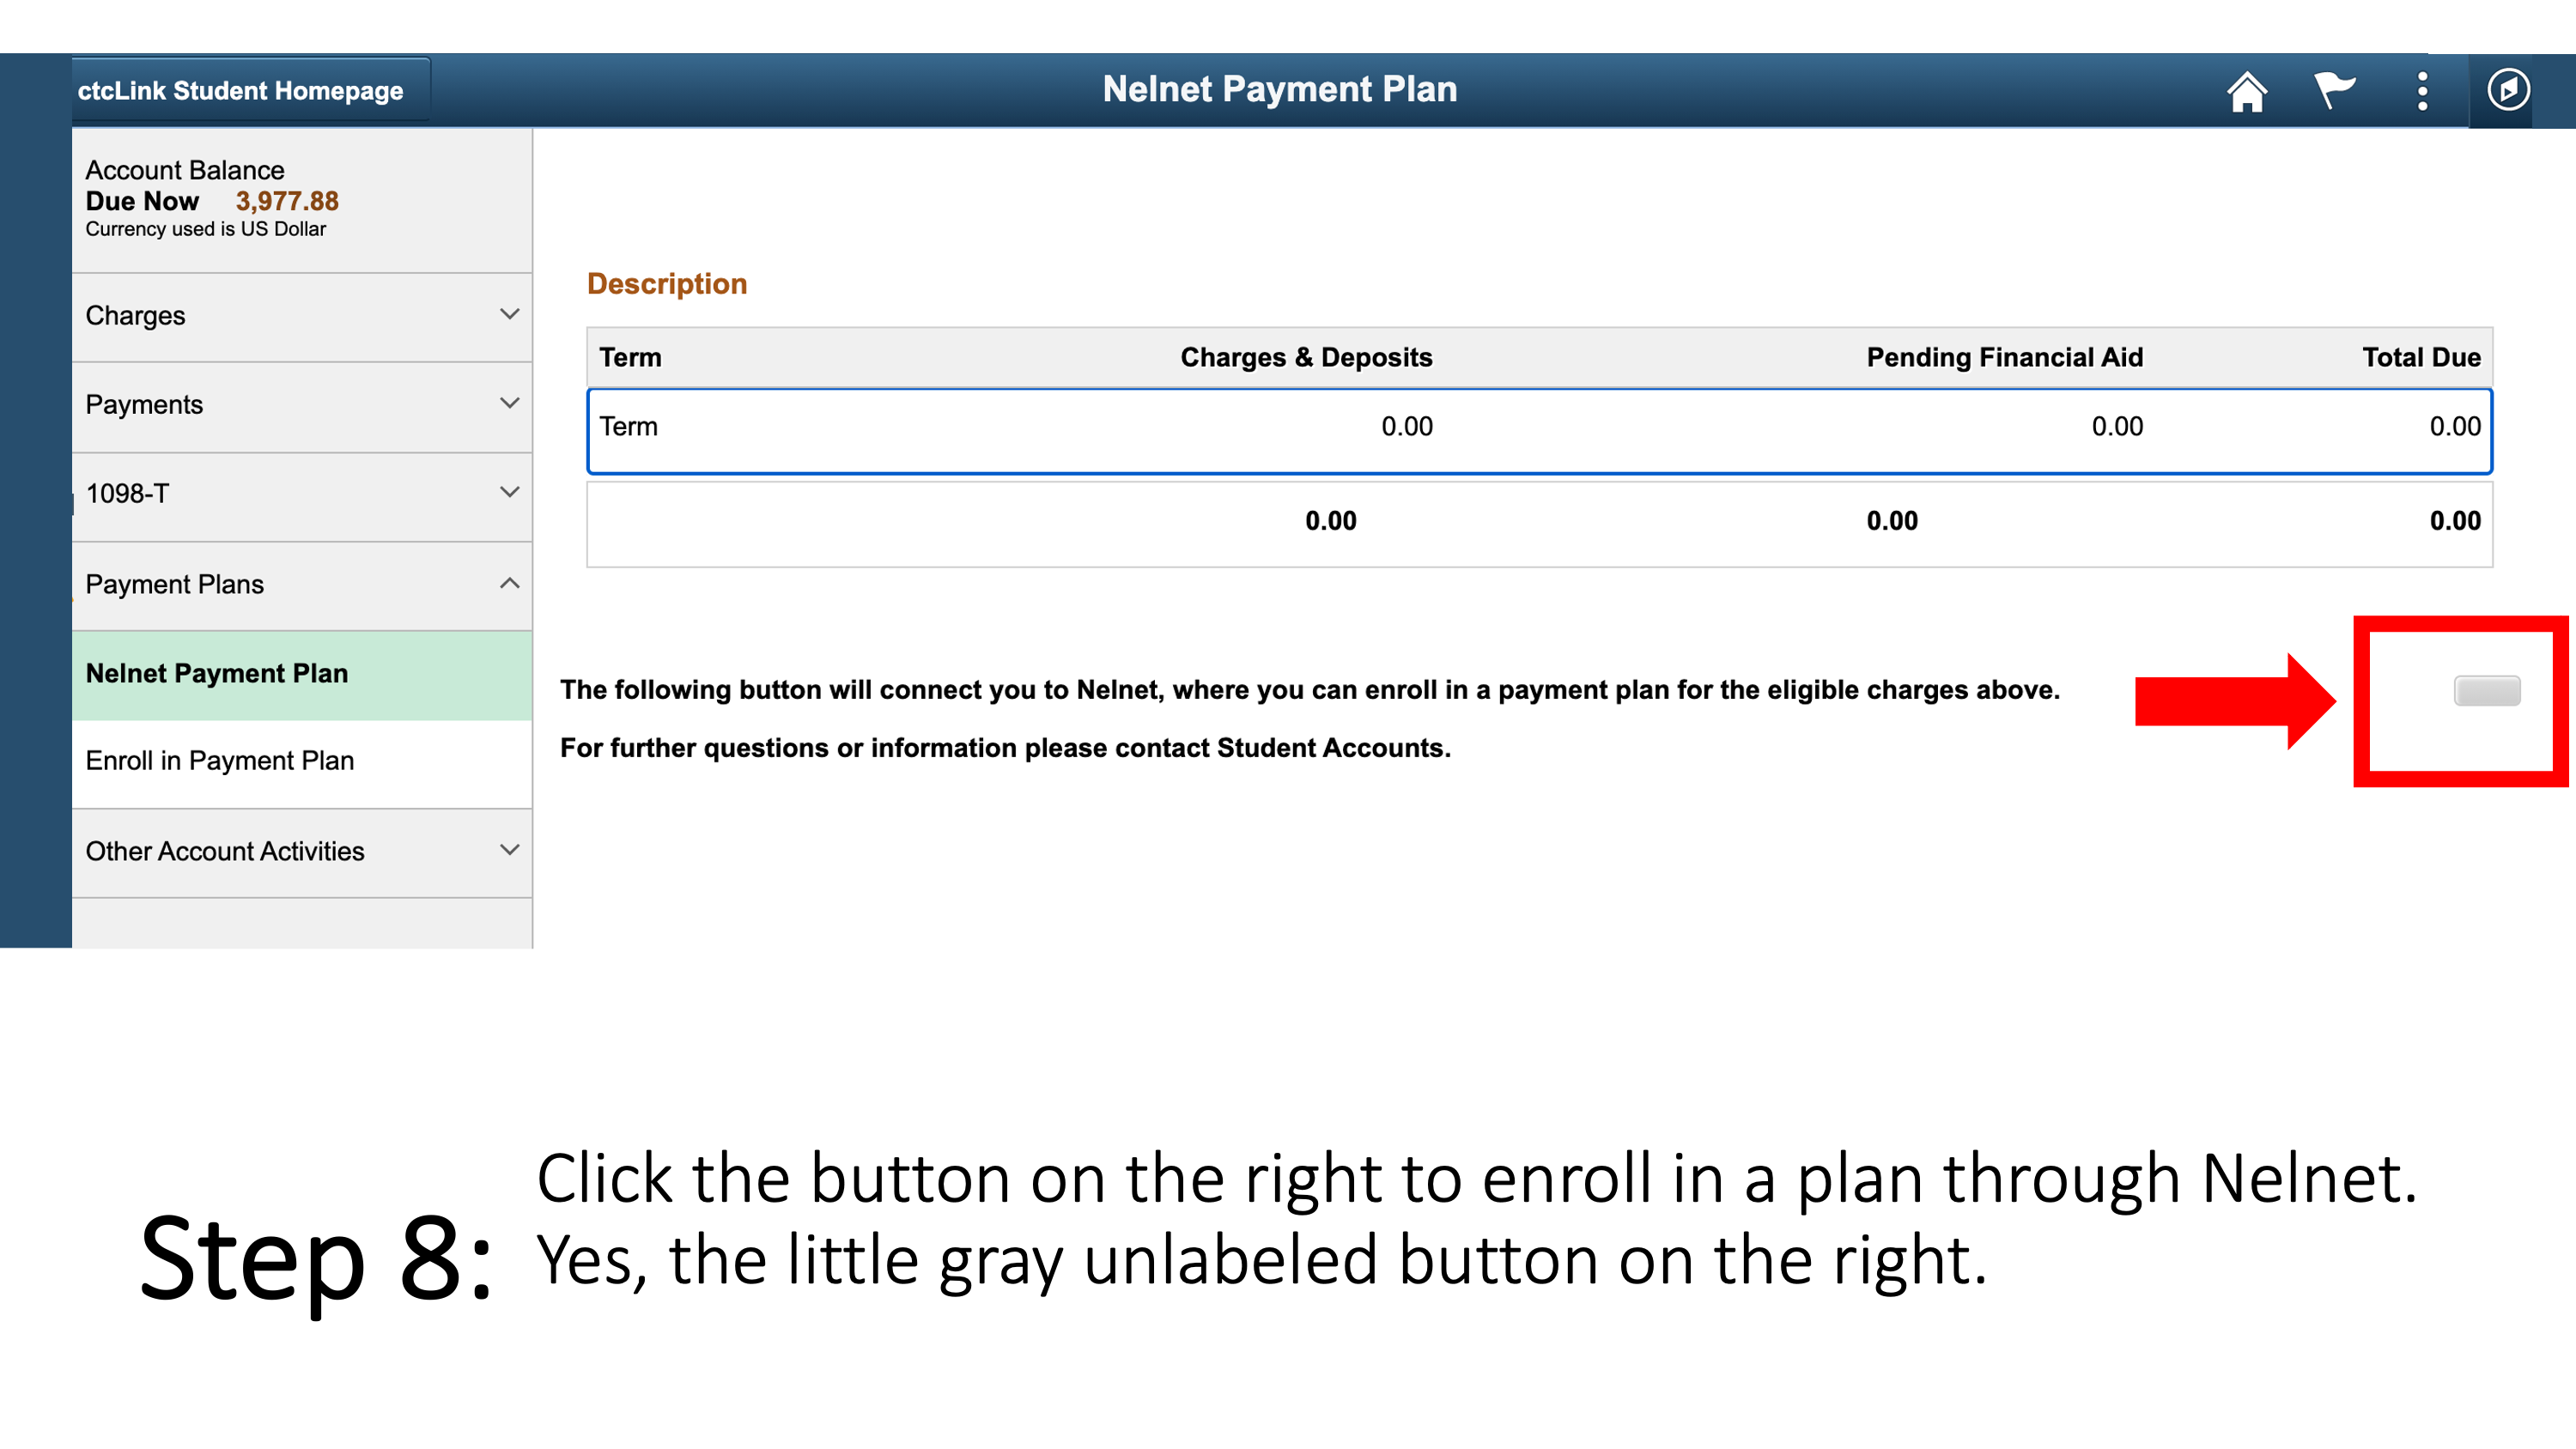 Click the button on the right to enroll in a plan through Nelnet. Yes, the little gray unlabeled button on the right. 